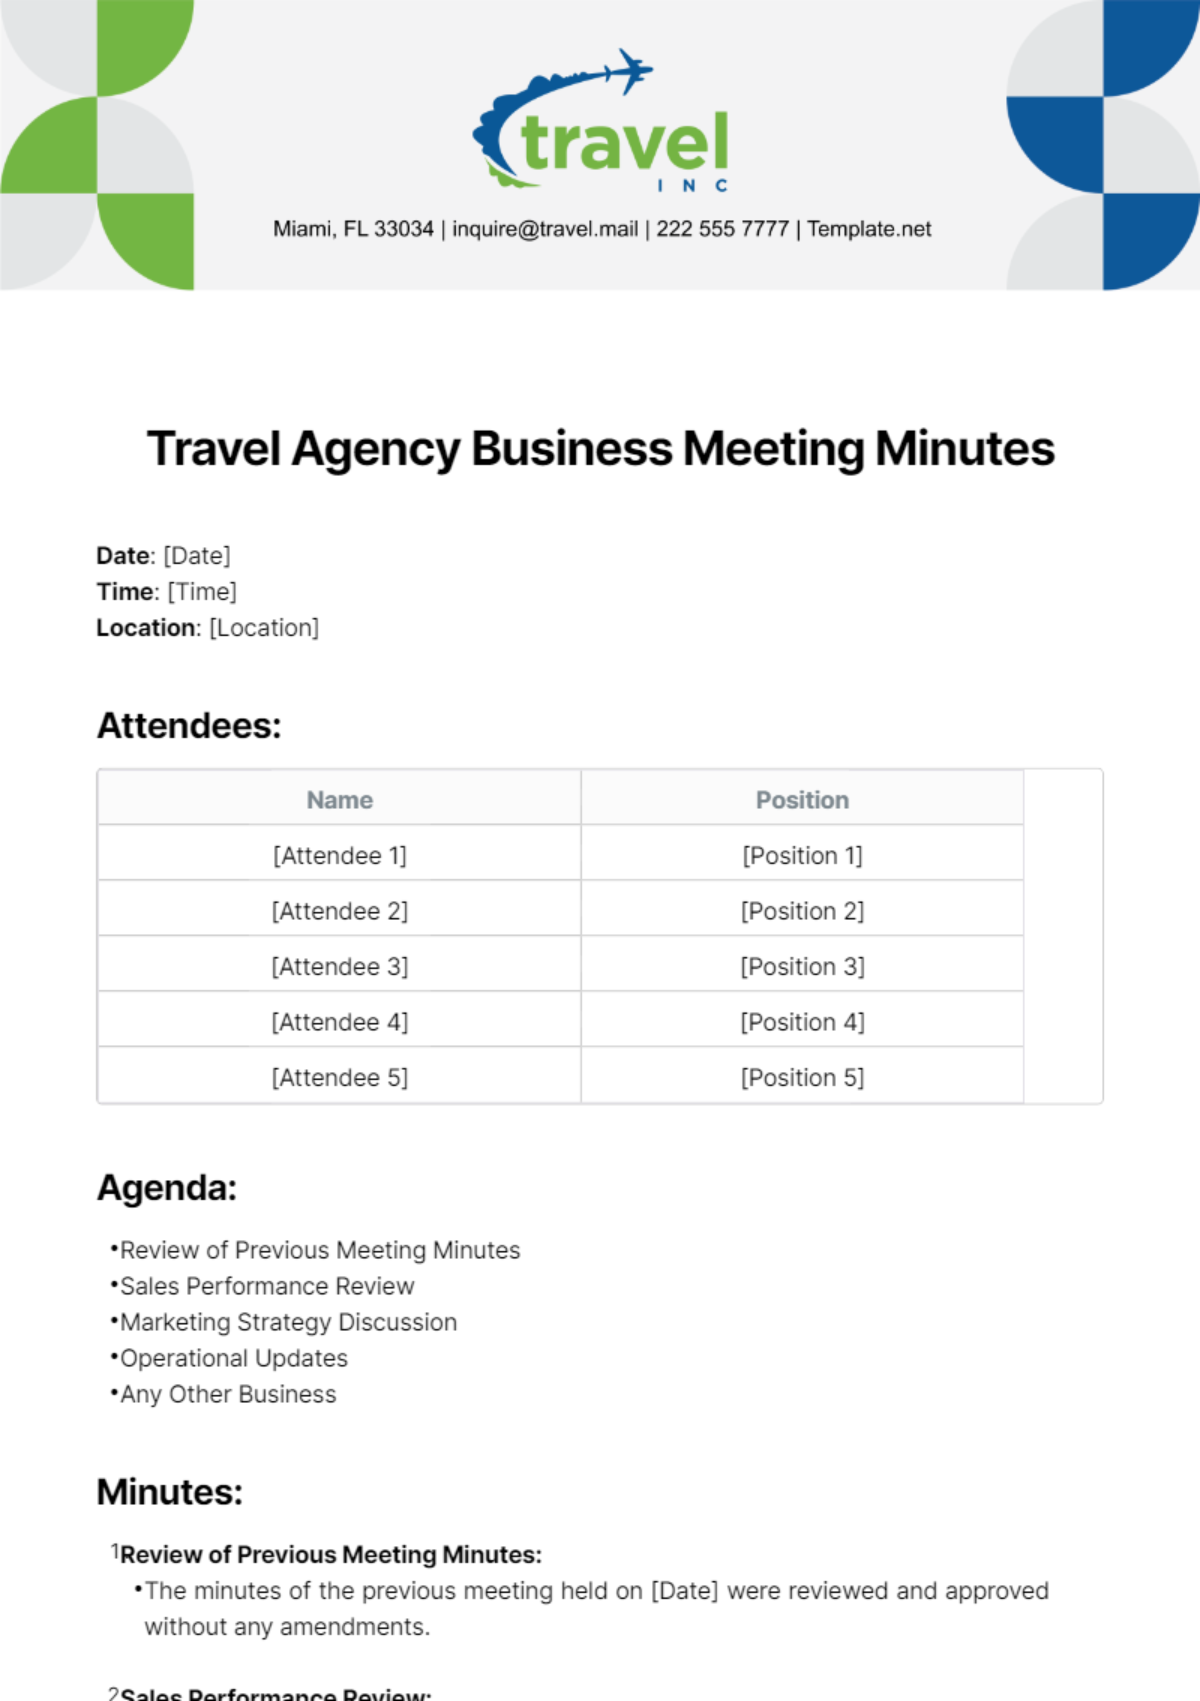 Free Travel Agency Business Meeting Minutes Template